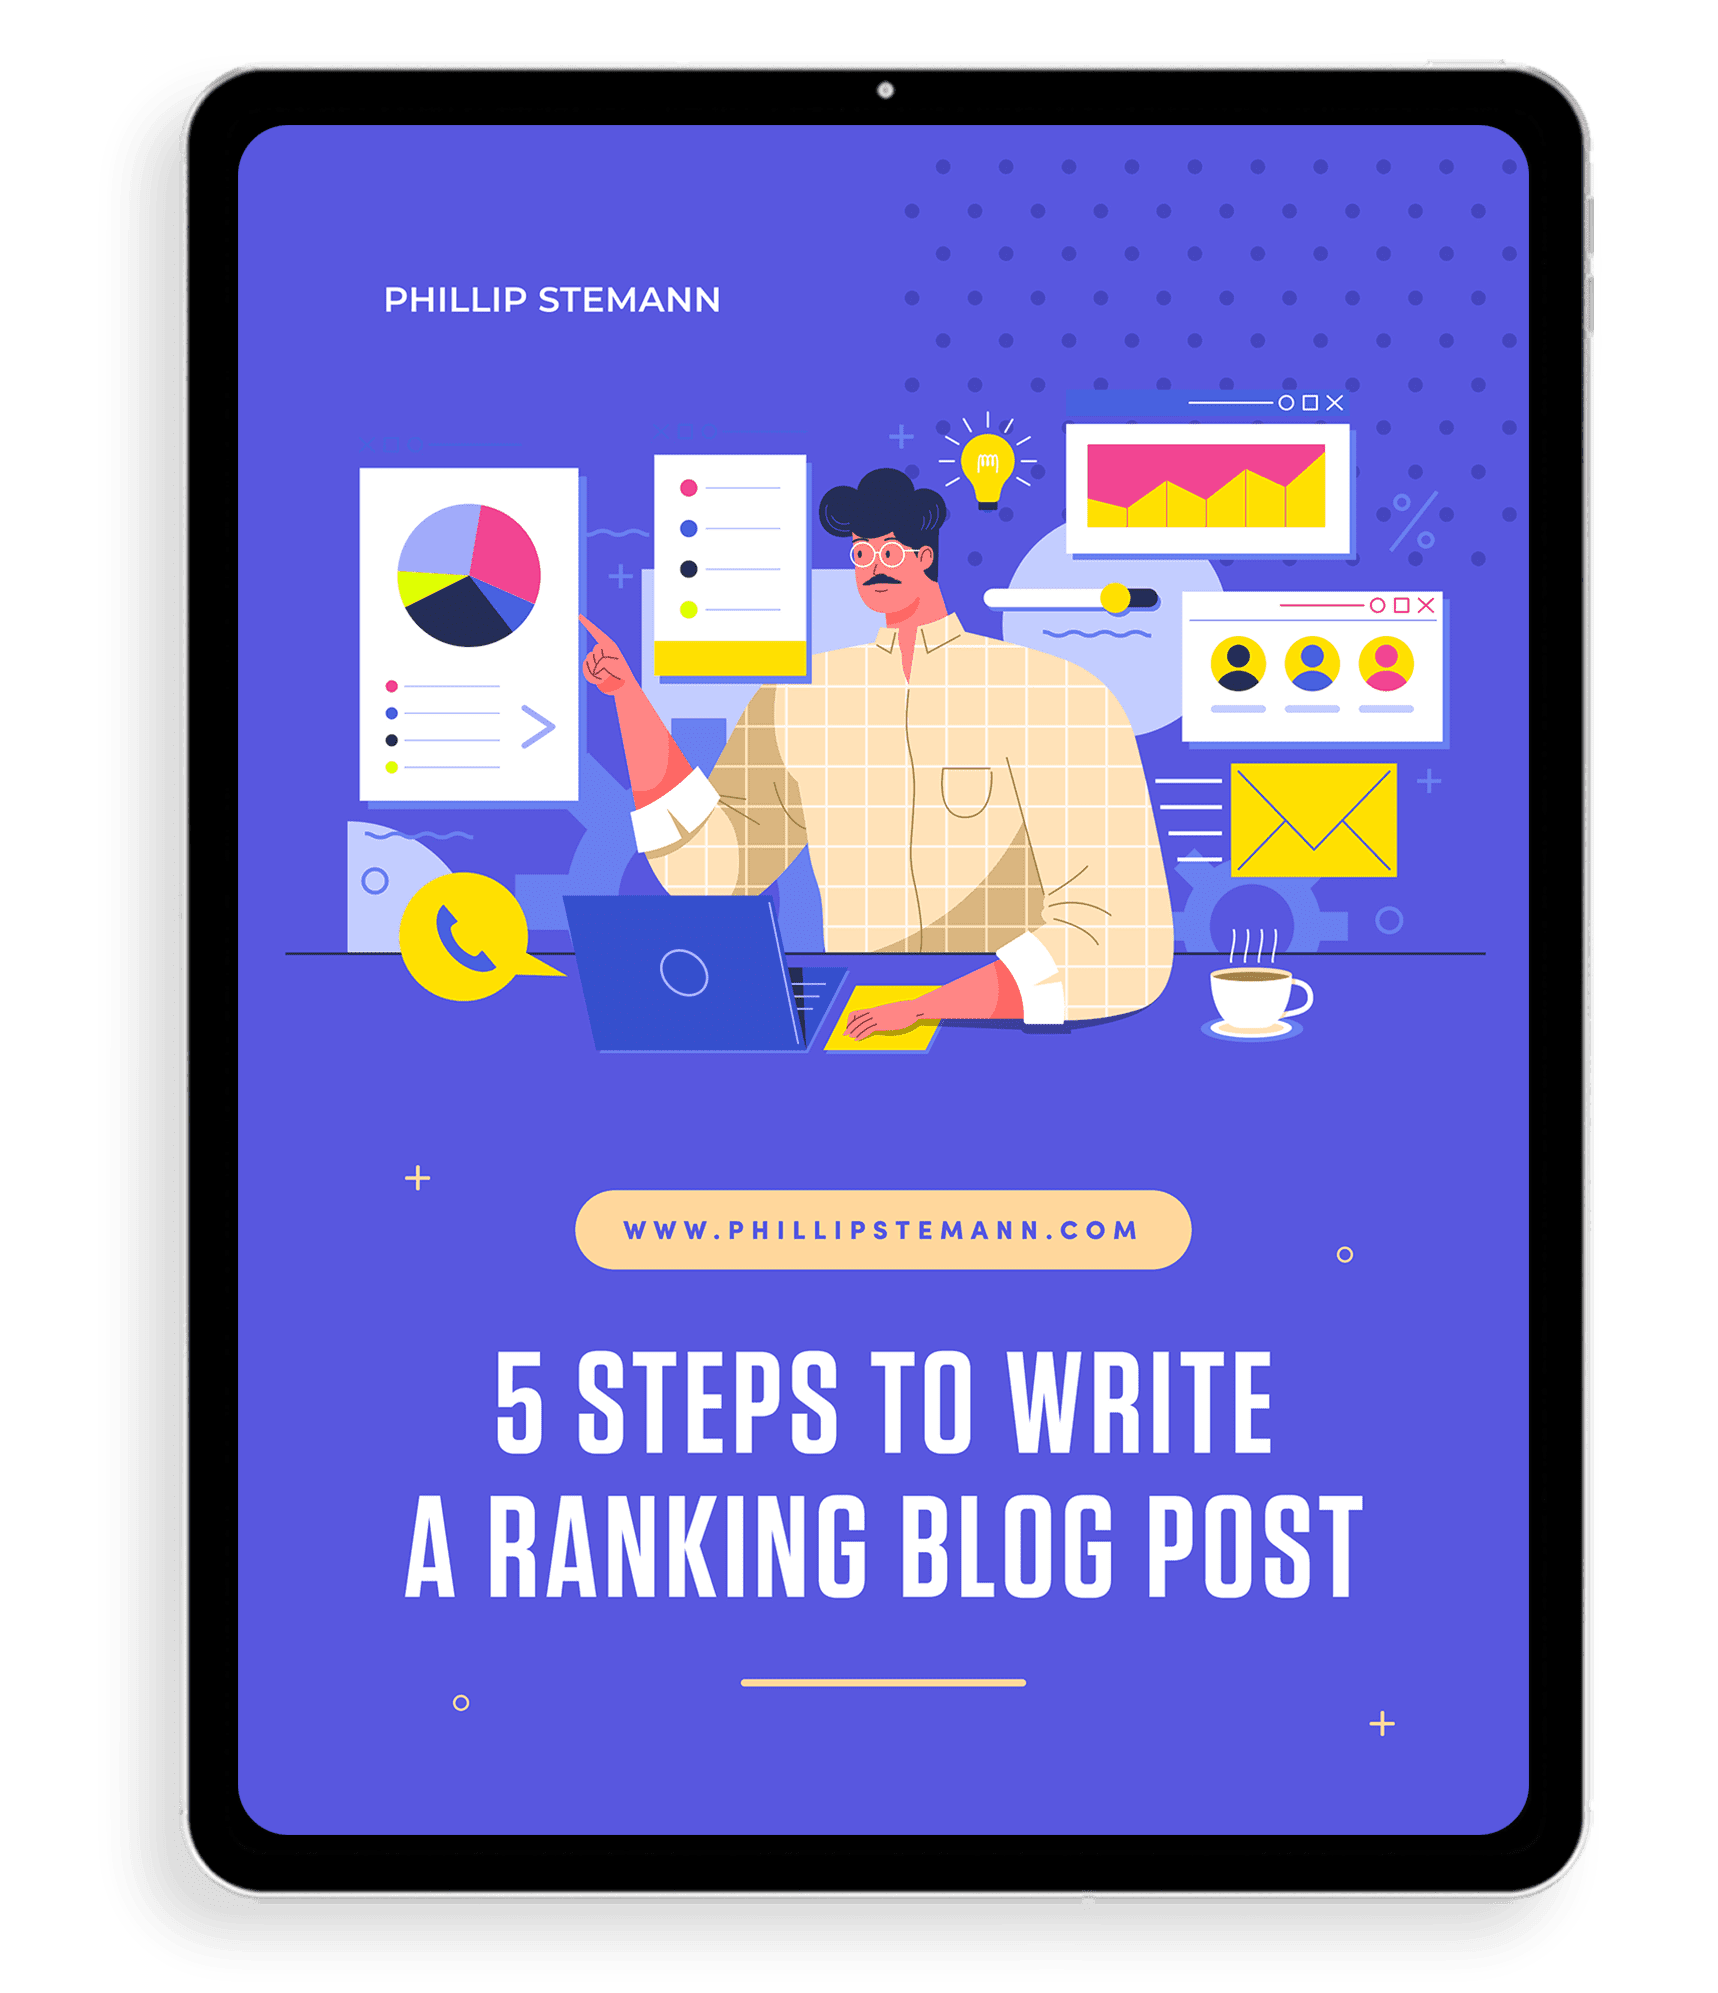 5 steps to write a ranking blog post